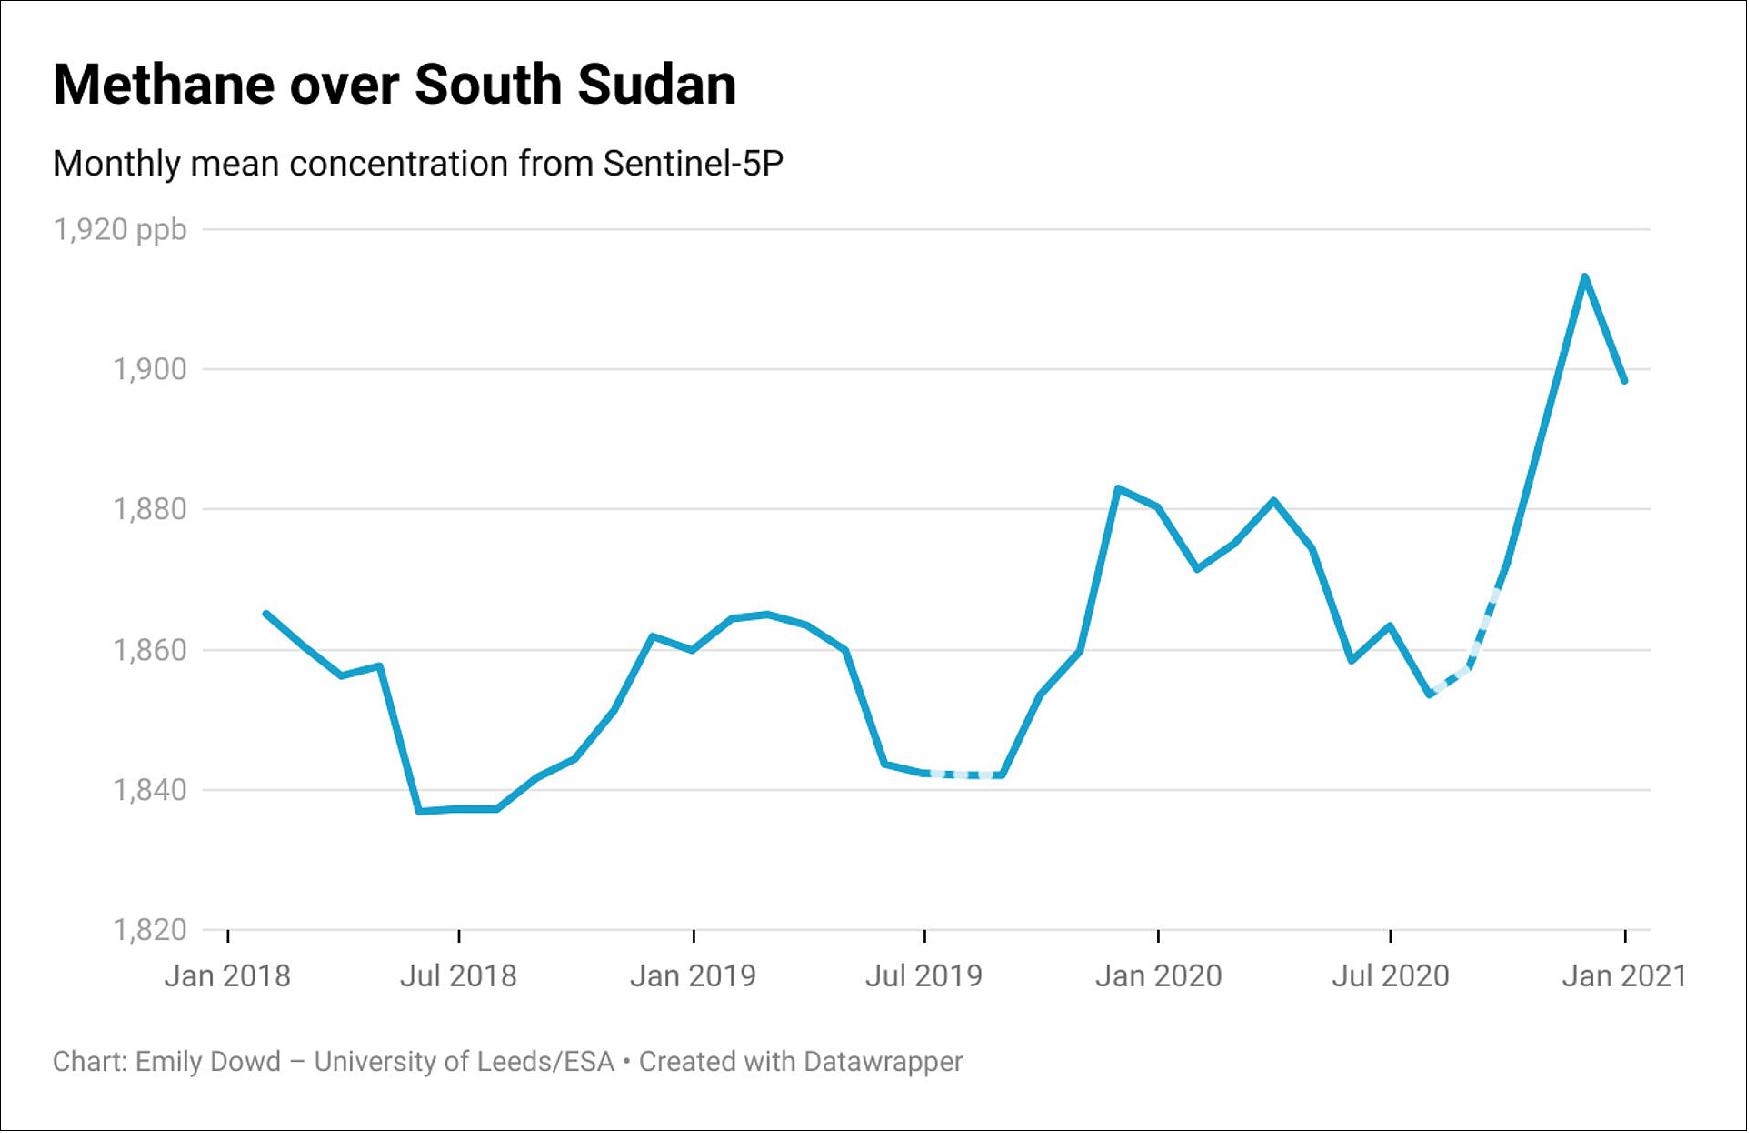 Figure 19: The graph shows the monthly mean methane concentrations over South Sudan from January 2018 to January 2021. The dashed lines represent times where there are less Sentinel-5P satellite data available (image credit: Emily Dowd – University of Leeds/ESA)